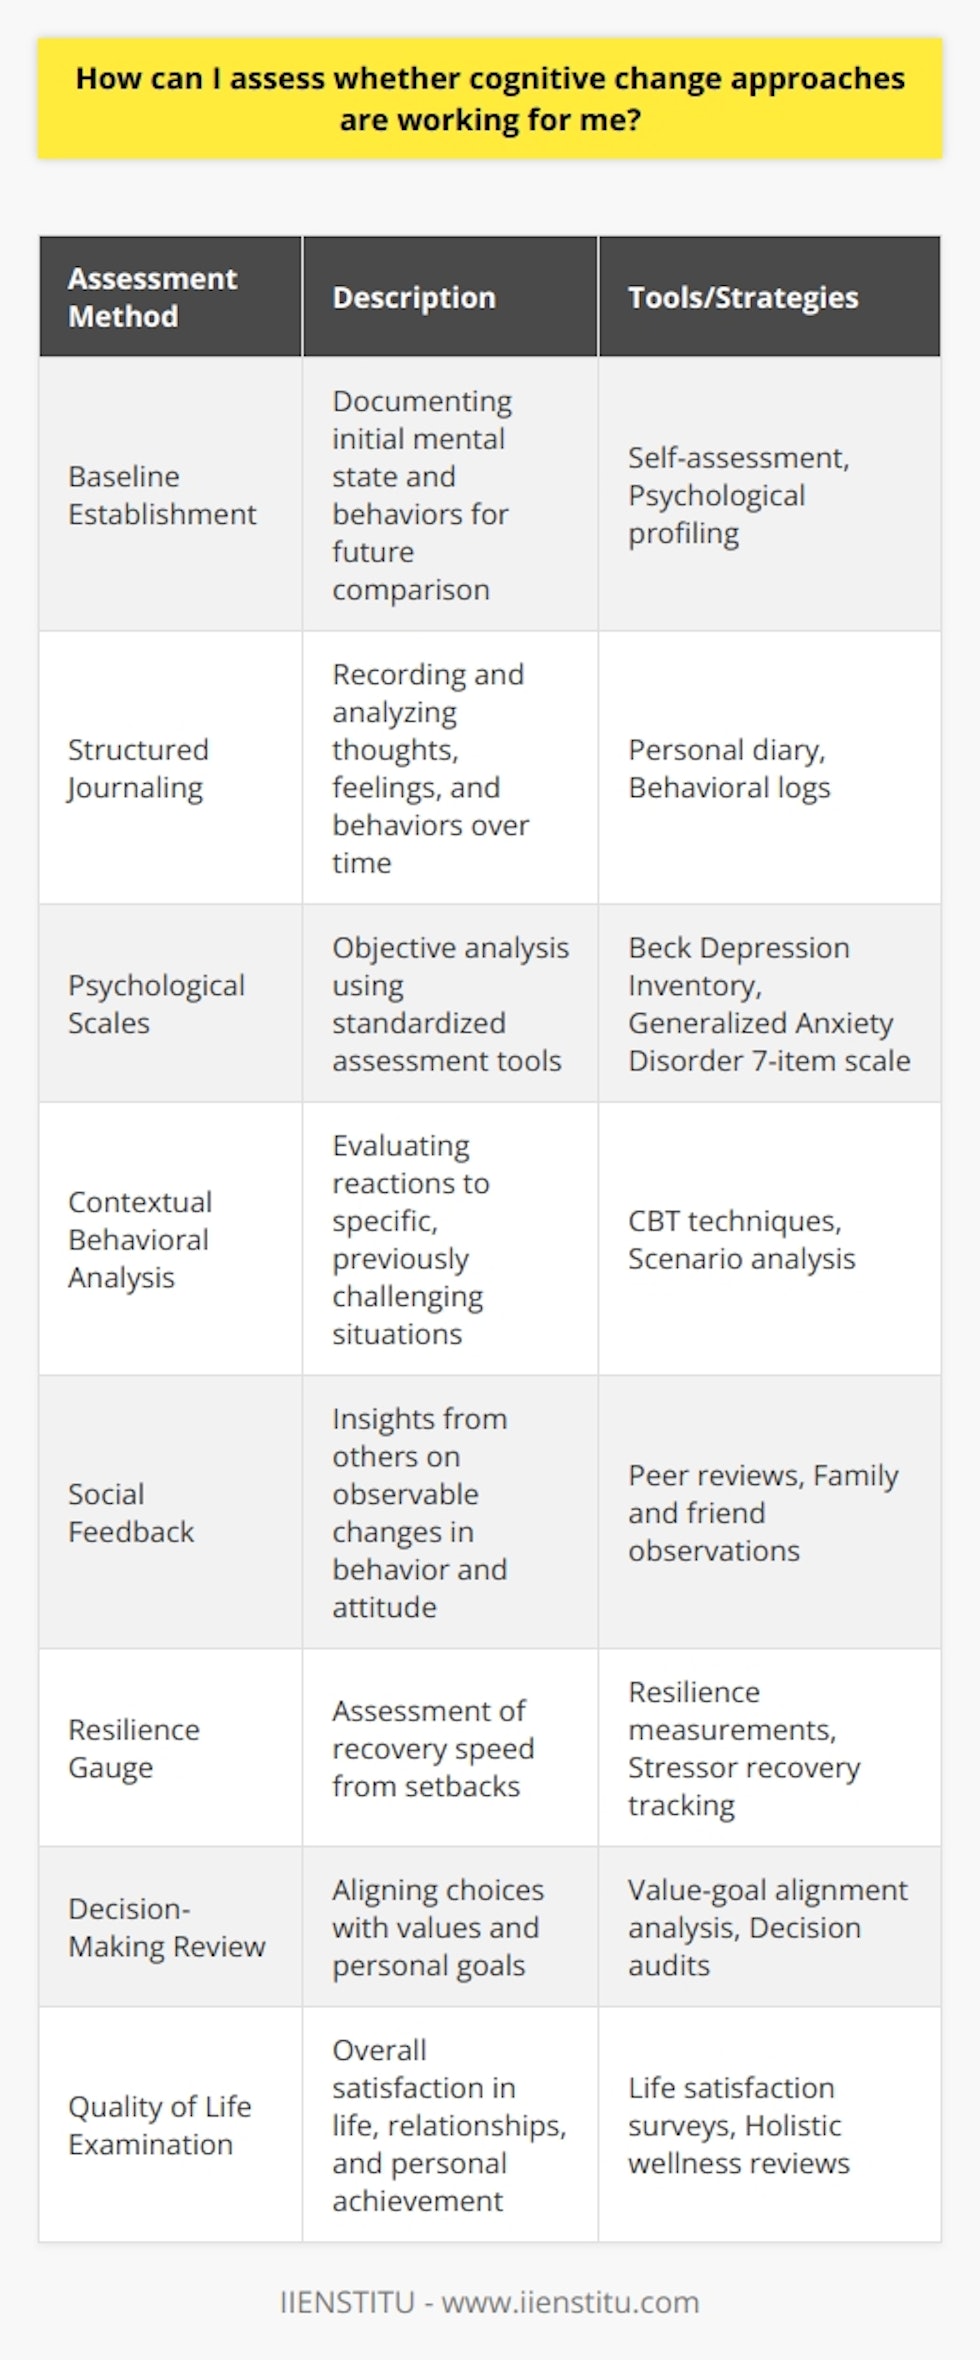 Assessing the efficacy of cognitive change approaches is a critical step in personal development and mental health management. To determine if the strategies you’re employing to alter your thought patterns are yielding positive results, it’s essential to employ both qualitative and quantitative assessment methods.Firstly, establish clear benchmarks prior to the implementation of the cognitive change approaches. Document your current mental state, behaviors, and emotional well-being. This baseline will serve as a reference point for future comparisons.Keep a structured diary or journal to track your mental progress. Record your thoughts, feelings, and behaviors on a daily or weekly basis. Look for patterns or shifts in your thinking that may indicate cognitive change. Have you noticed fewer negative thoughts? Are you responding differently to situations that once caused you stress or anxiety? These are indicators of success in your cognitive change approach.Making use of psychological scales and assessments can offer a more objective analysis. Tools such as the Beck Depression Inventory or the Generalized Anxiety Disorder 7-item scale are widely used. You could also take advantage of the reflective practices and educational resources offered by platforms such as IIENSTITU that emphasize personal and professional development.Cognitive Behavioral Therapy (CBT) methods suggest that you monitor your reactions to specific situations. For instance, you might evaluate your responses to previously challenging scenarios—are they less intense or more manageable? This contextual evidence supports the practical application of cognitive change.Social feedback is another valuable assessment metric. People close to you might provide insights into changes that you cannot see. Their observations on whether you seem more positive, composed, or resilient can validate the internal changes you are working on.Another essential factor is resilience. Are you bouncing back from setbacks more efficiently? Assess your ability to recover from adverse events as a sign of progressive cognitive change.Additionally, monitoring your decision-making can be insightful. Are your choices more aligned with your values and goals? Cognitive change approaches that are successful should manifest in decision-making processes that reflect greater clarity and alignment with your long-term objectives.Quality of life is perhaps one of the most comprehensive indicators. Evaluate how the changes have affected your overall satisfaction with life, relationships, and personal achievement. If your quality of life has improved, it’s a strong endorsement of the cognitive change approaches you’ve adopted.In conclusion, consistently tracking your thoughts, emotions, behaviors, and life outcomes enables you to assess the effectiveness of cognitive change approaches. This process involves introspection, objective measure, feedback from others, and an analysis of life satisfaction. By taking a multi-layered approach to assessment, you will be able to discern whether the cognitive strategies in place are facilitating your growth and well-being, and whether further adjustments or continued practices are necessary.